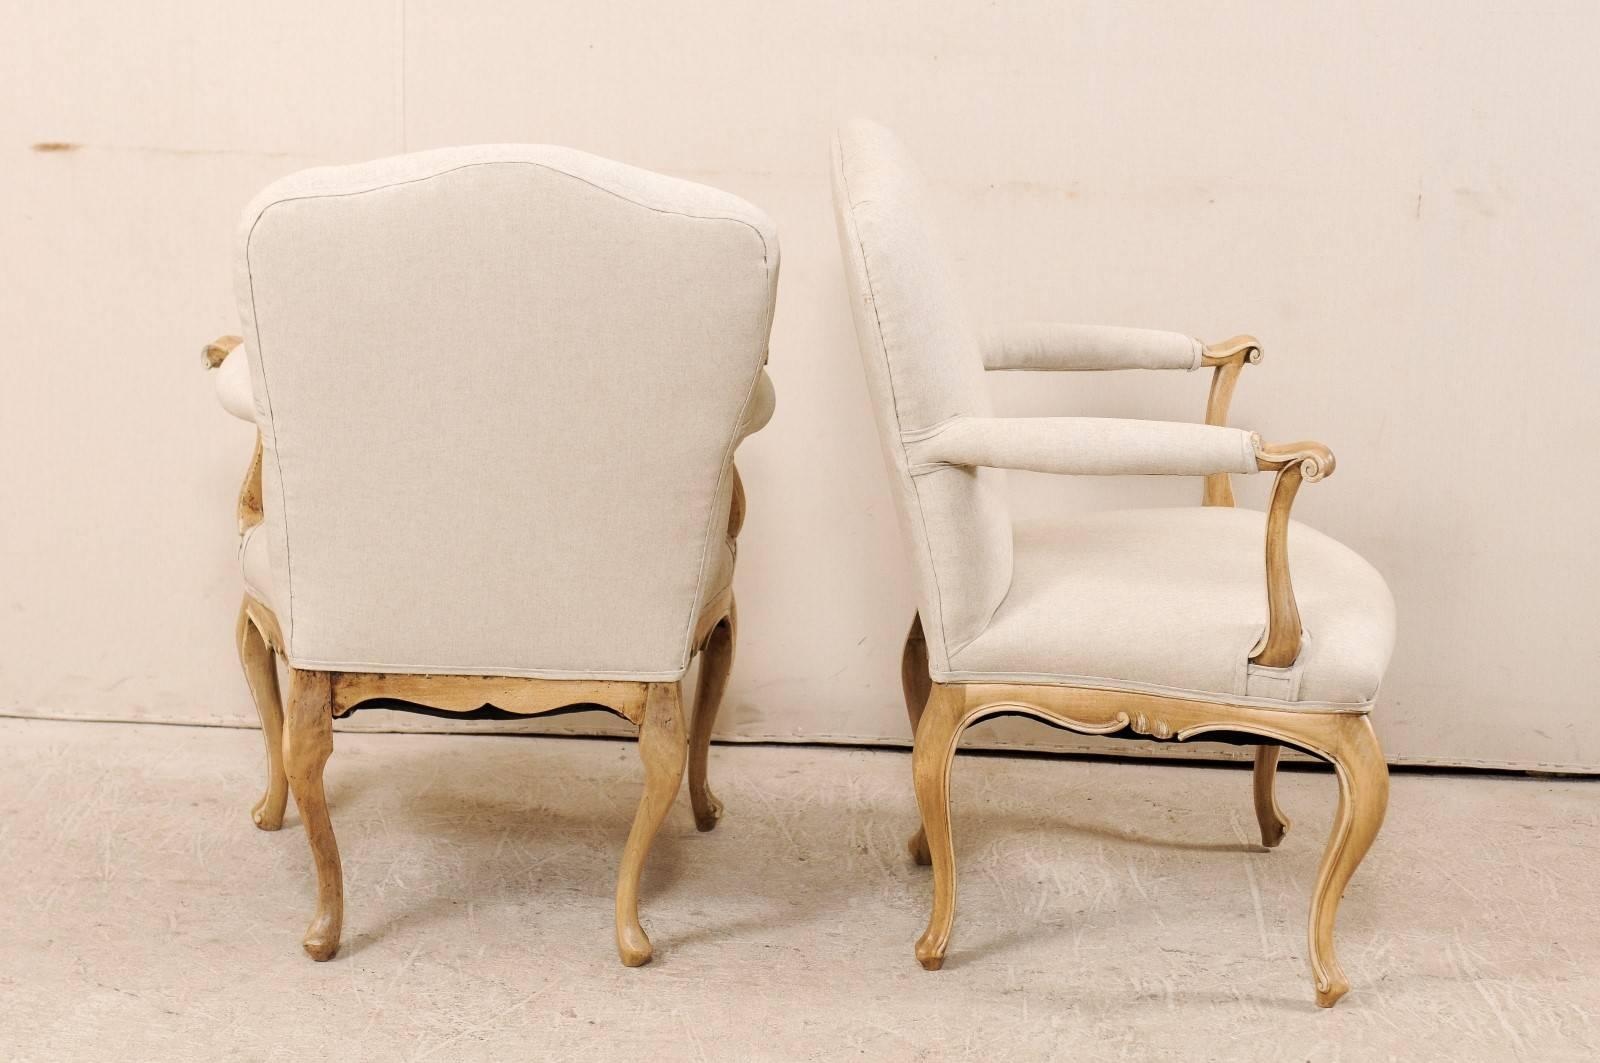 Pair of Lovely 19th Century Italian Upholstered Armchairs with Cabriole Legs For Sale 1